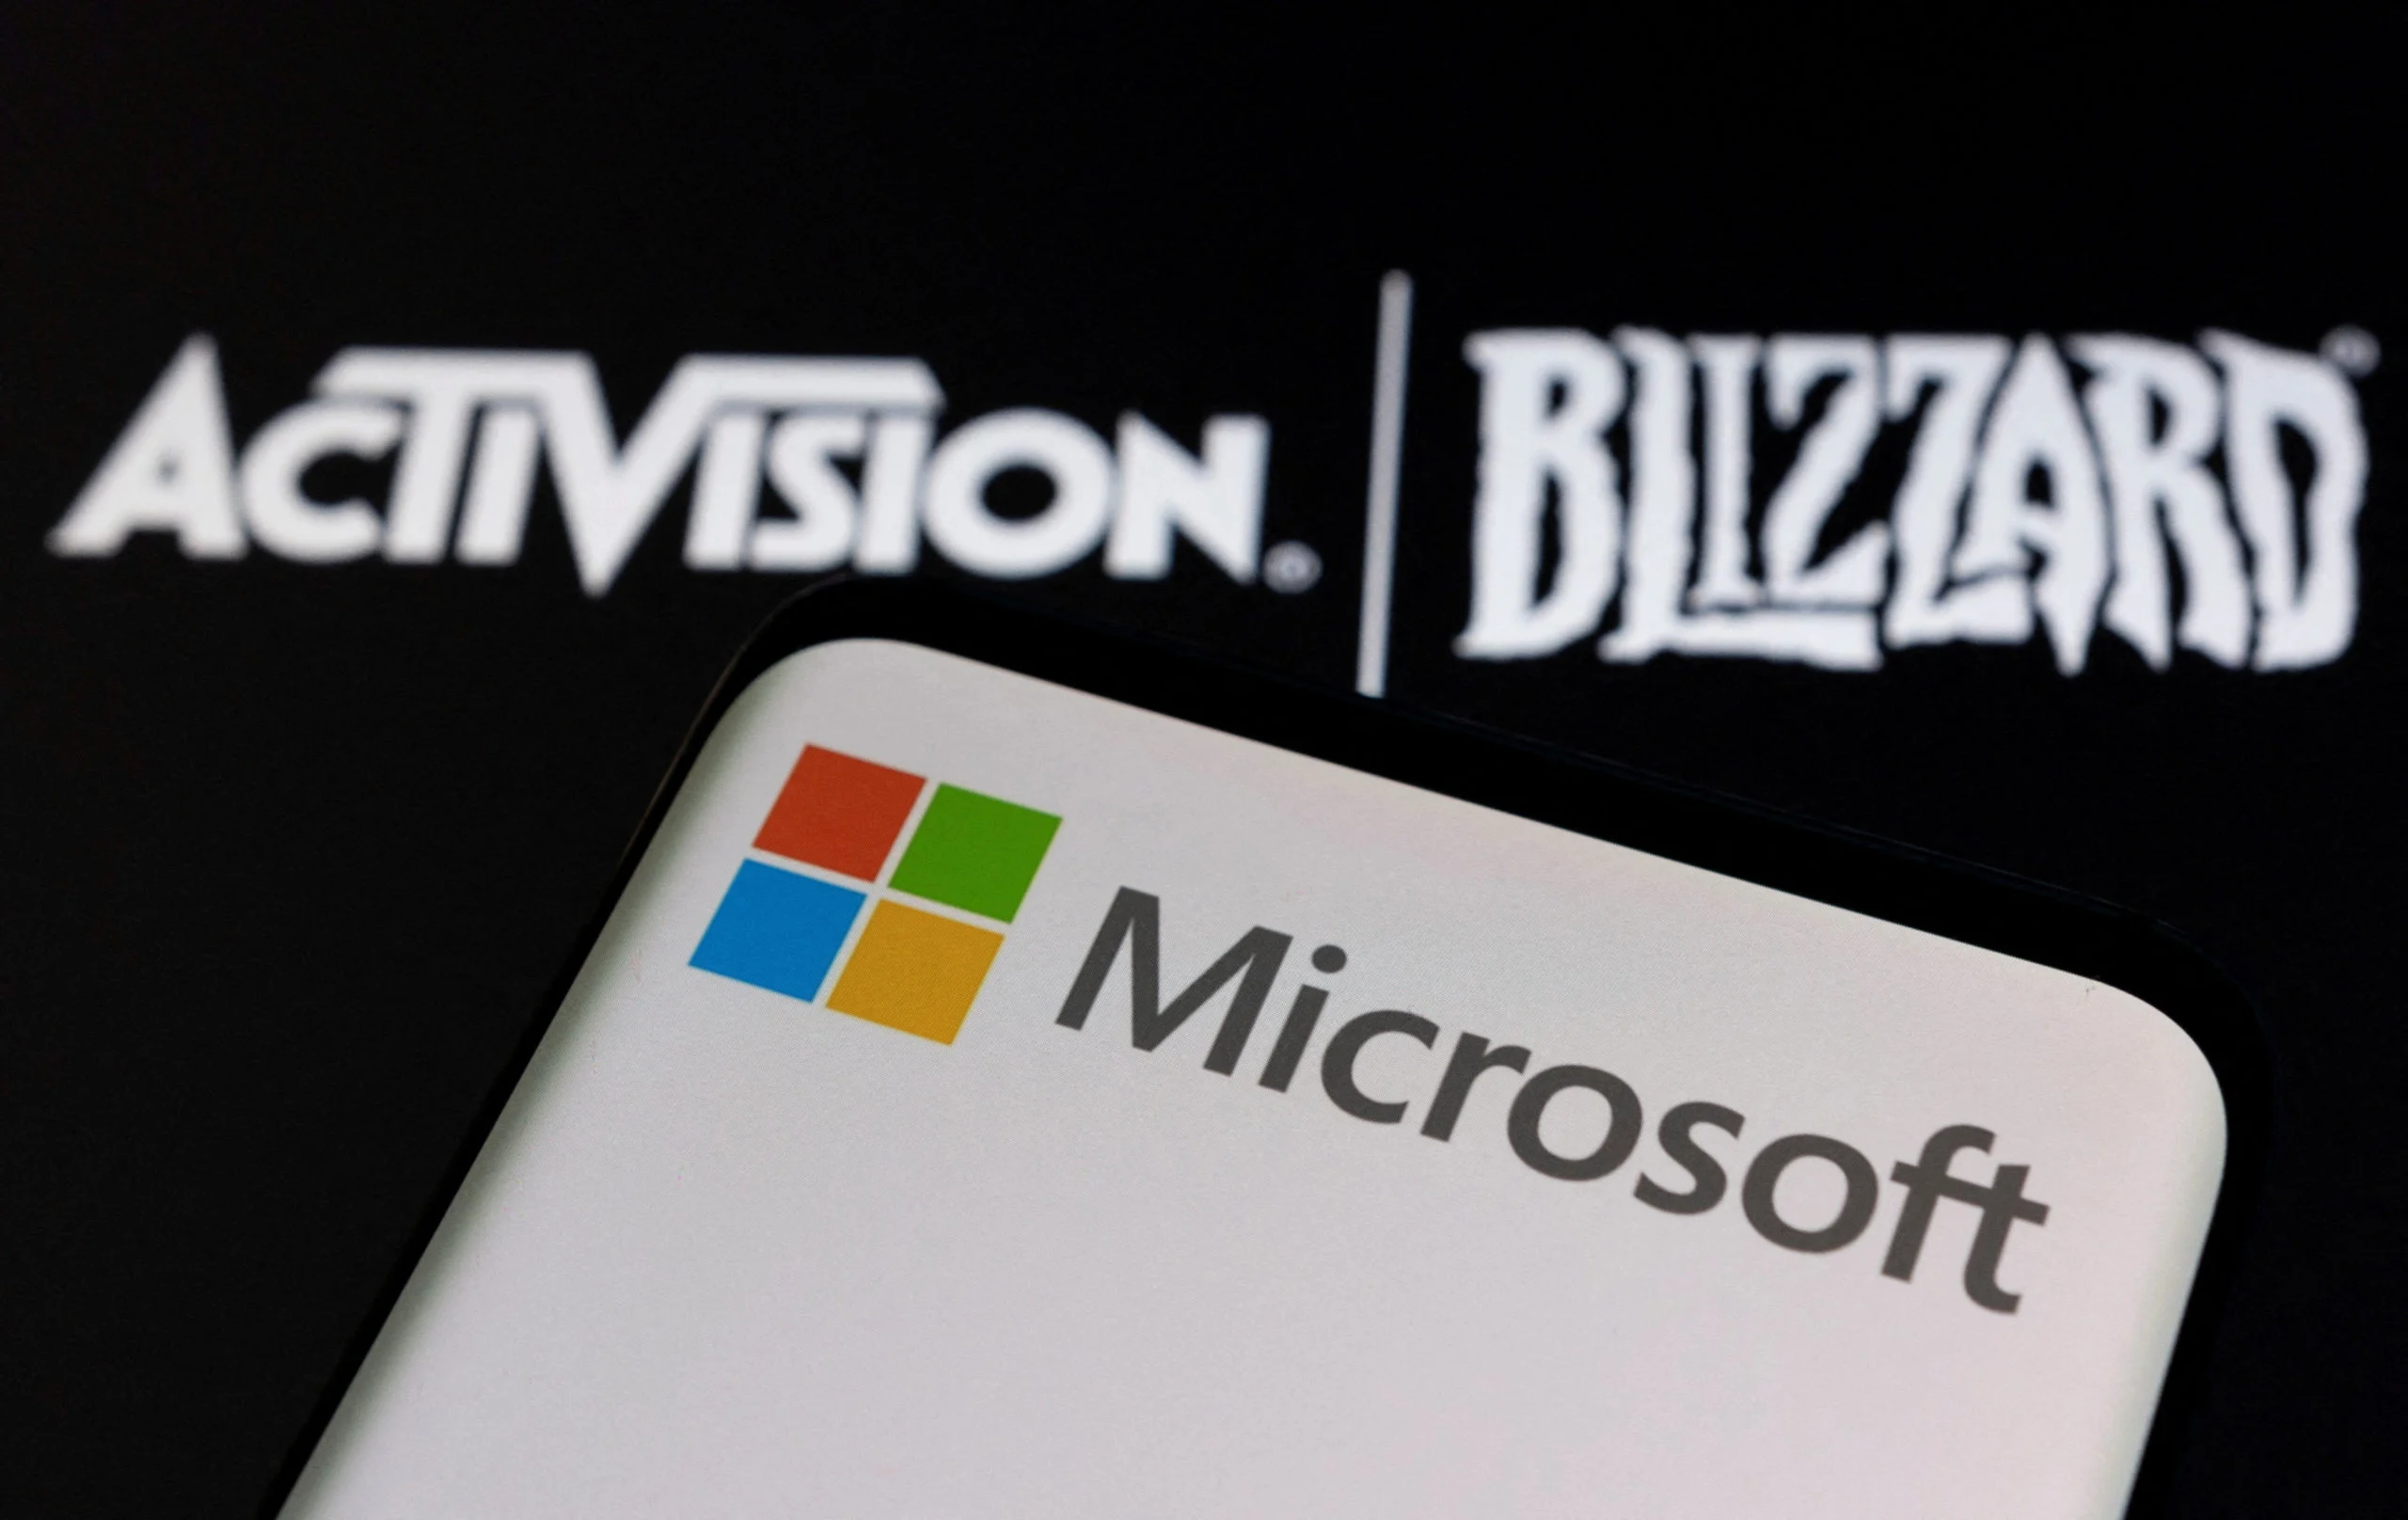 March 23: Latest Microsoft-Activision megadeal news updates